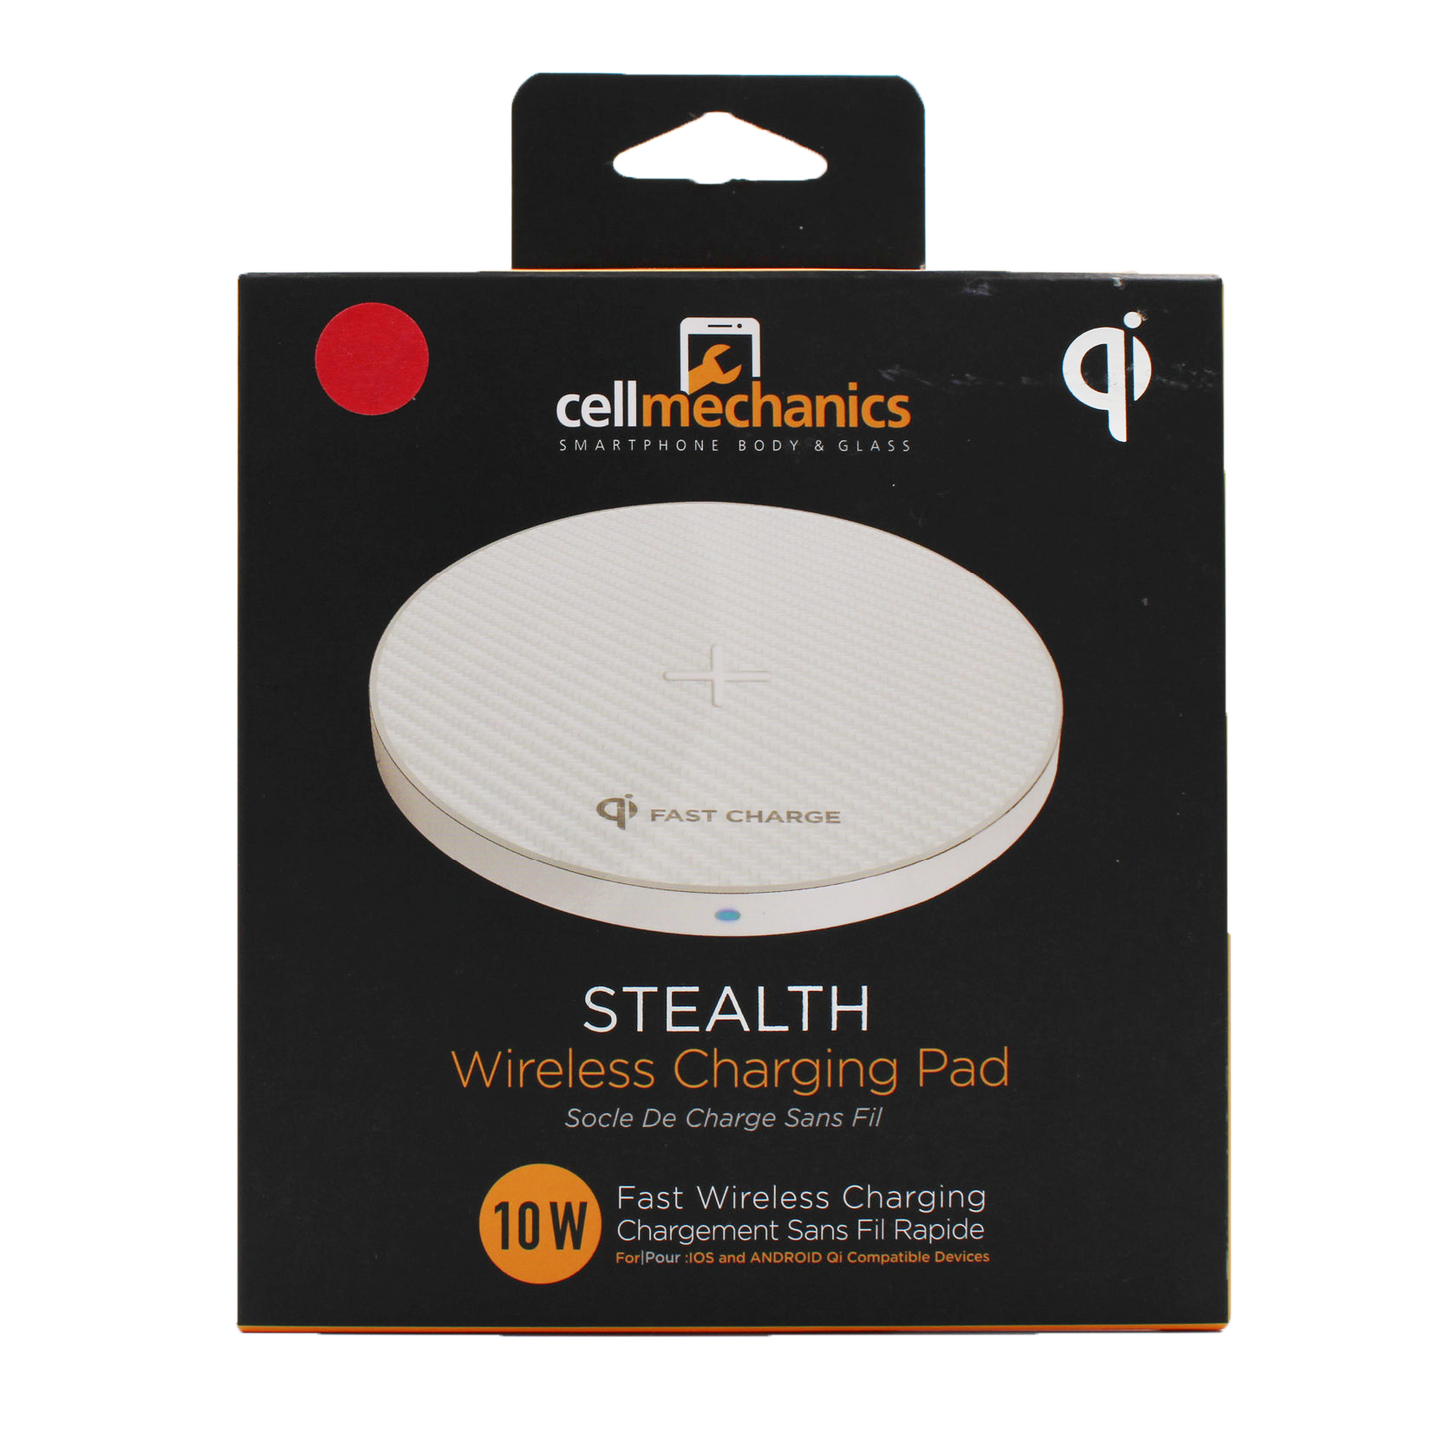 Stealth 10W Wireless Charging Pad